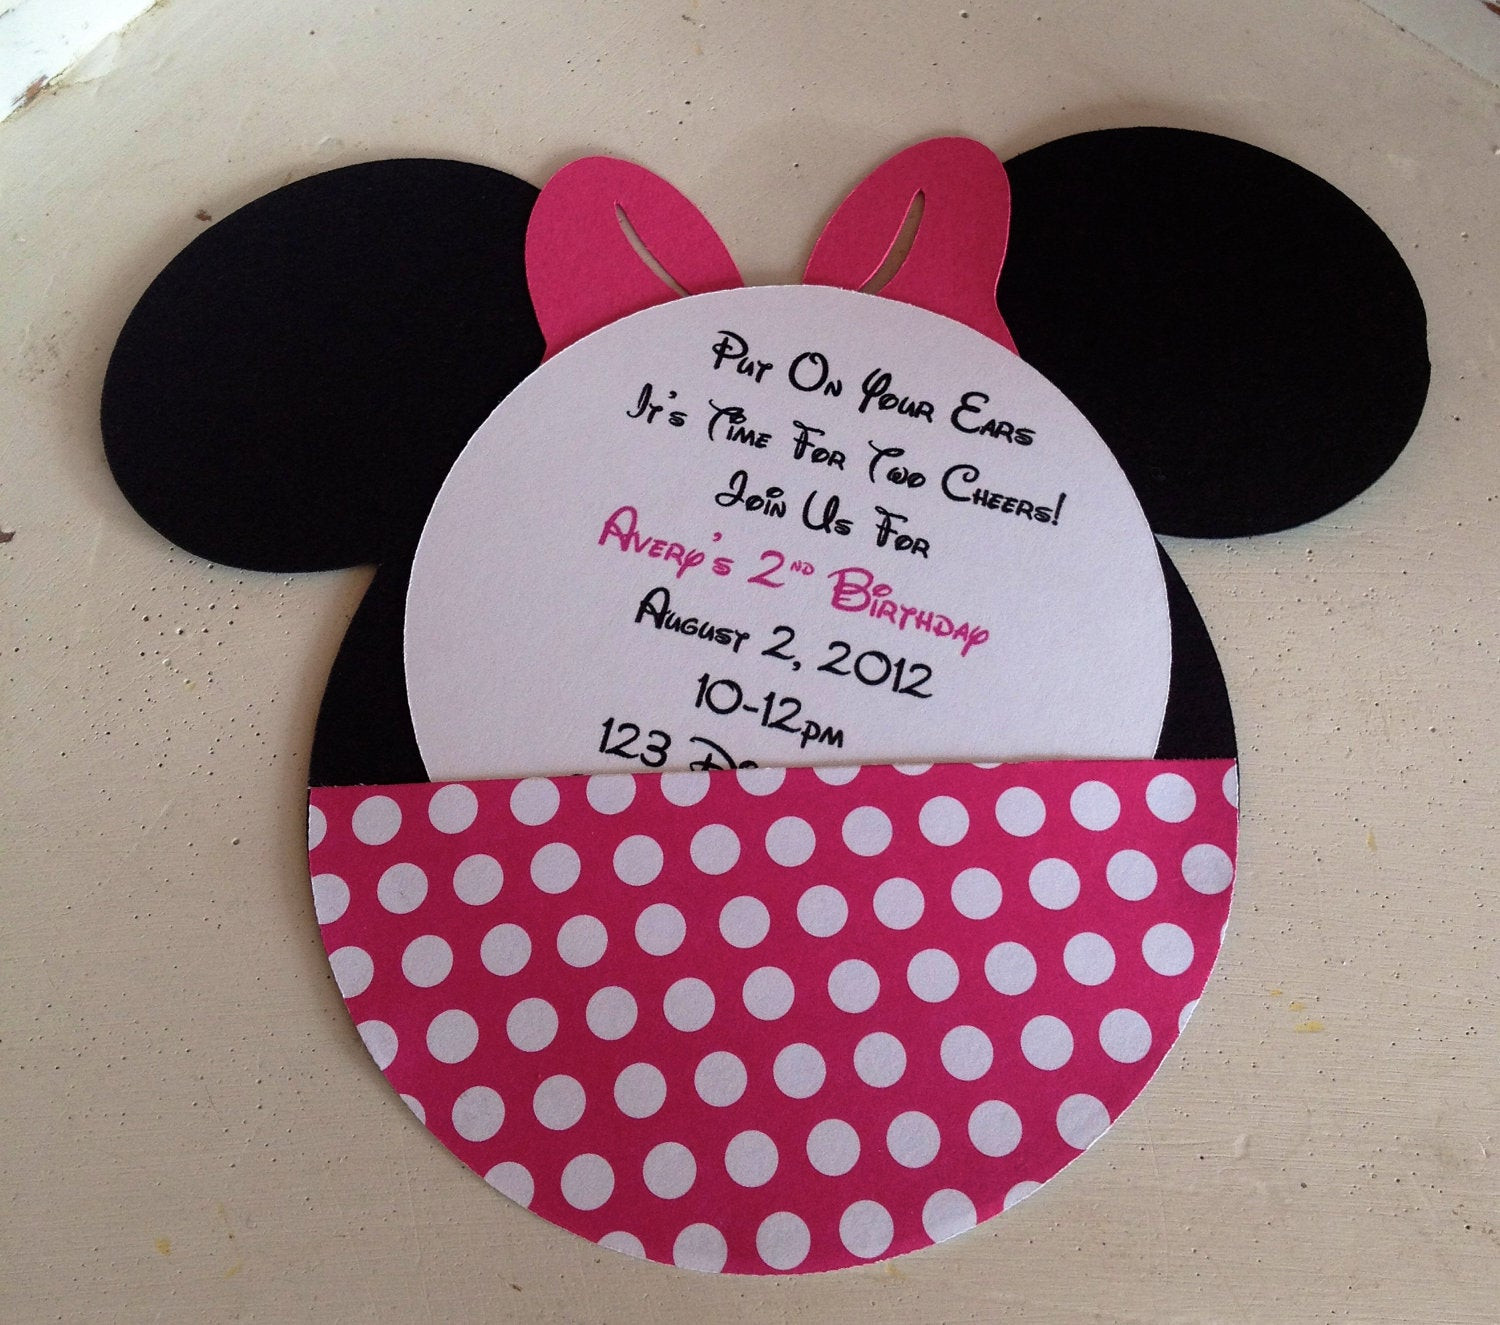 Minnie Mouse Birthday Party Invitations
 Handmade Custom Hot Pink Minnie Mouse Birthday Invitations